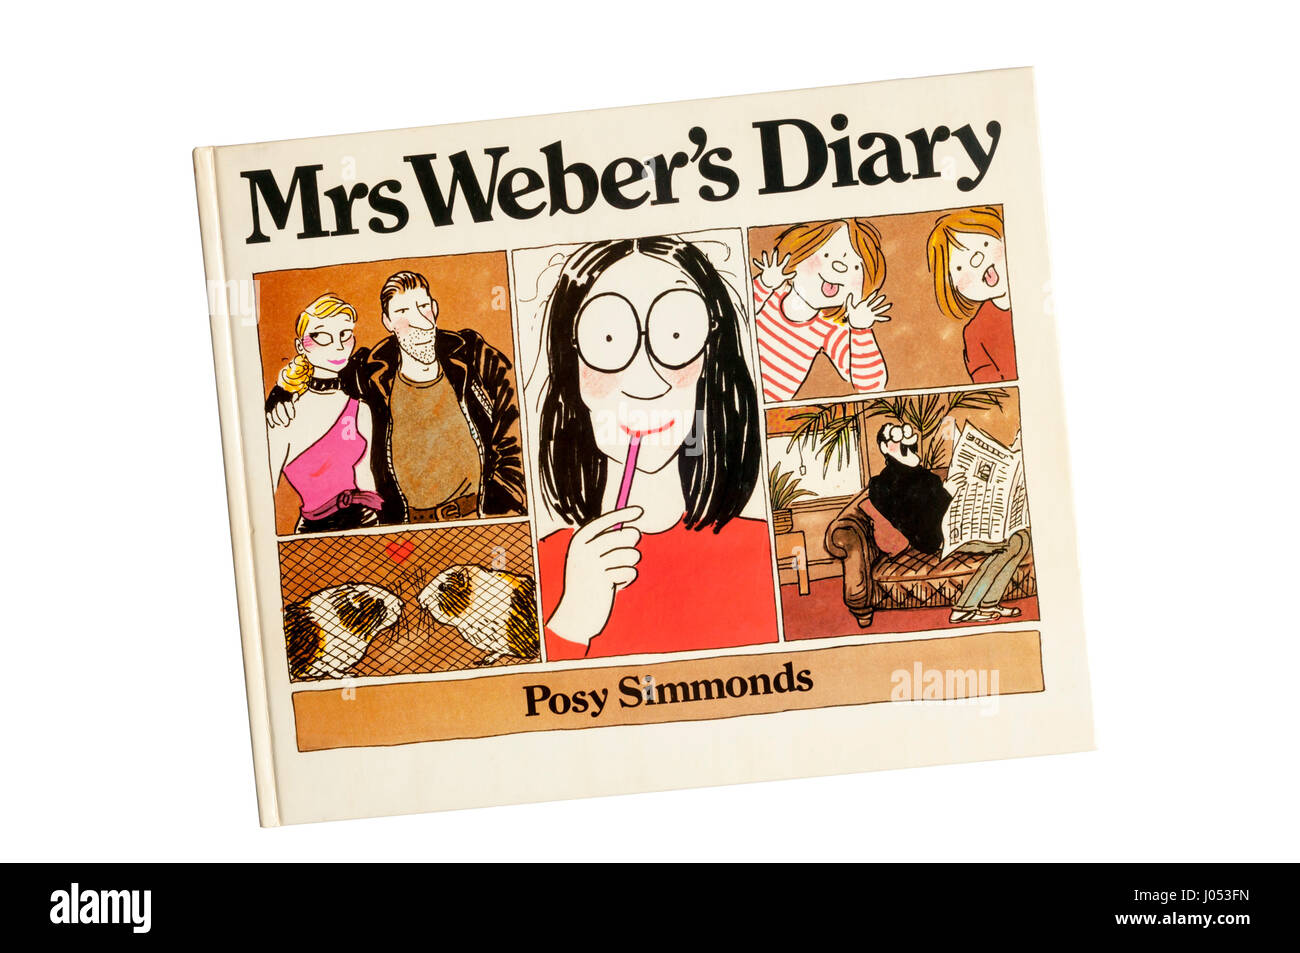 Mrs Weber's Diary by Posy Simmonds. First published in 1979. Stock Photo